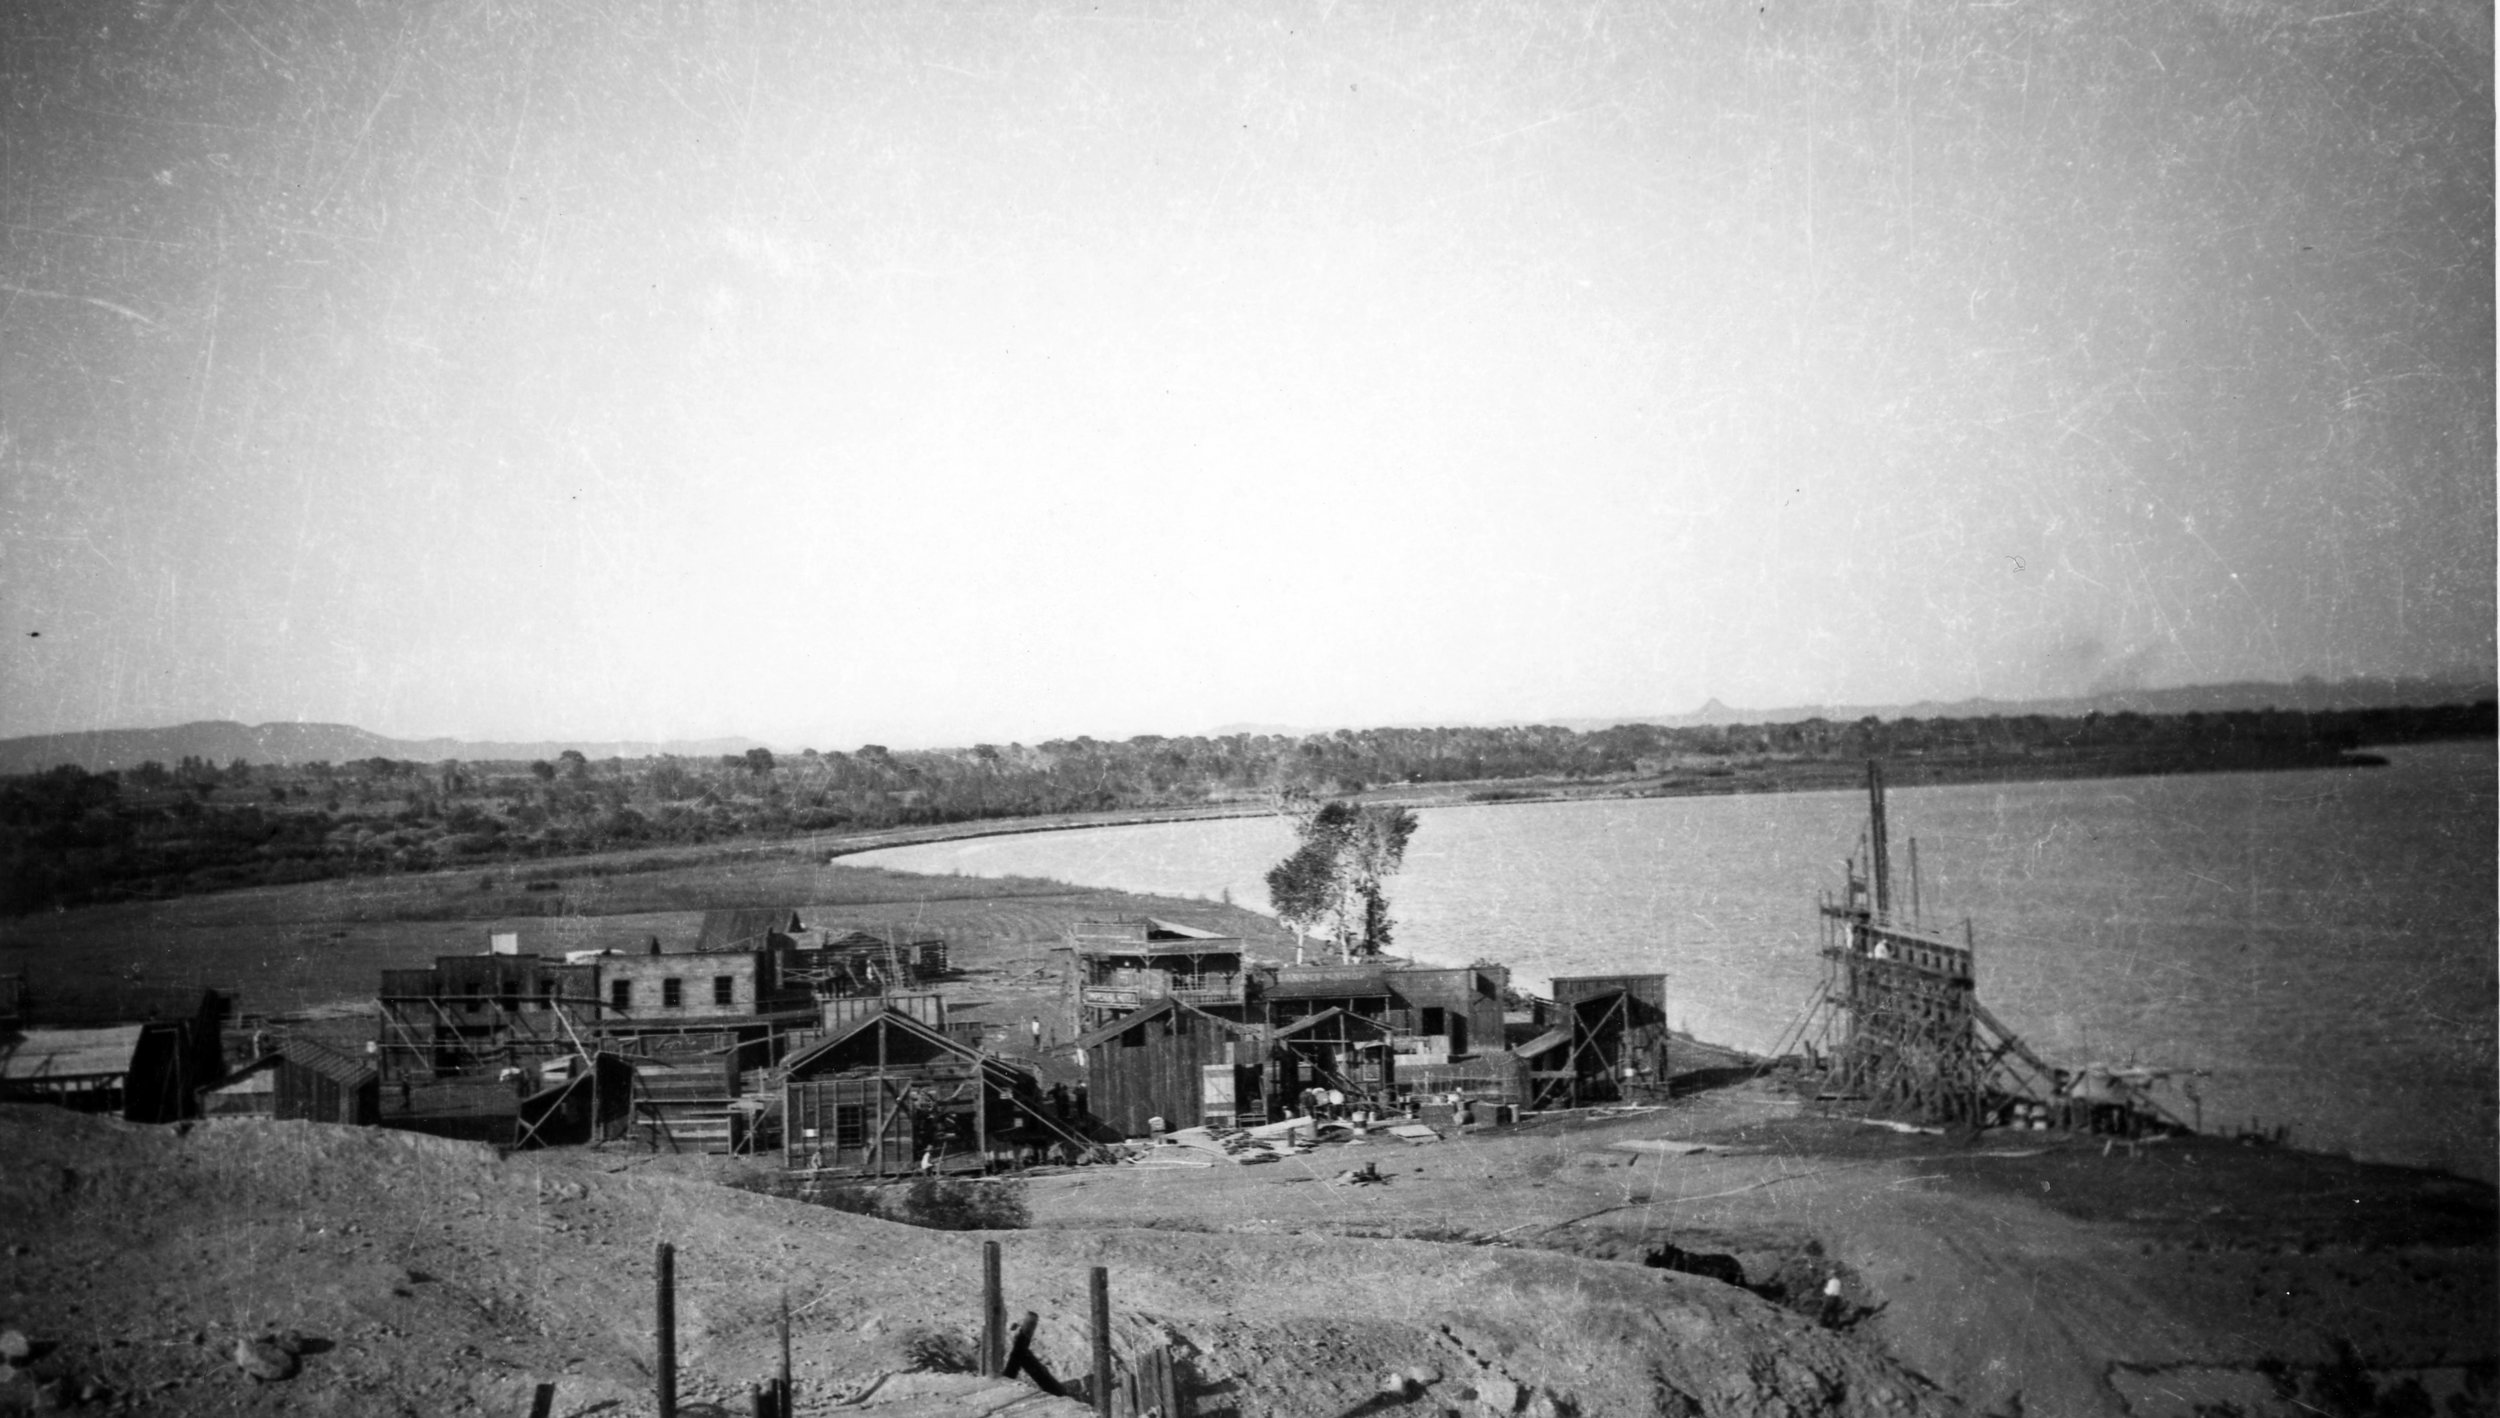 Another behind-the-scenes shot from The Big Trail (1930) set in Yuma, Arizona. Photo courtesy of Mrs. Hazel Balinger from The Lapidary Journal.